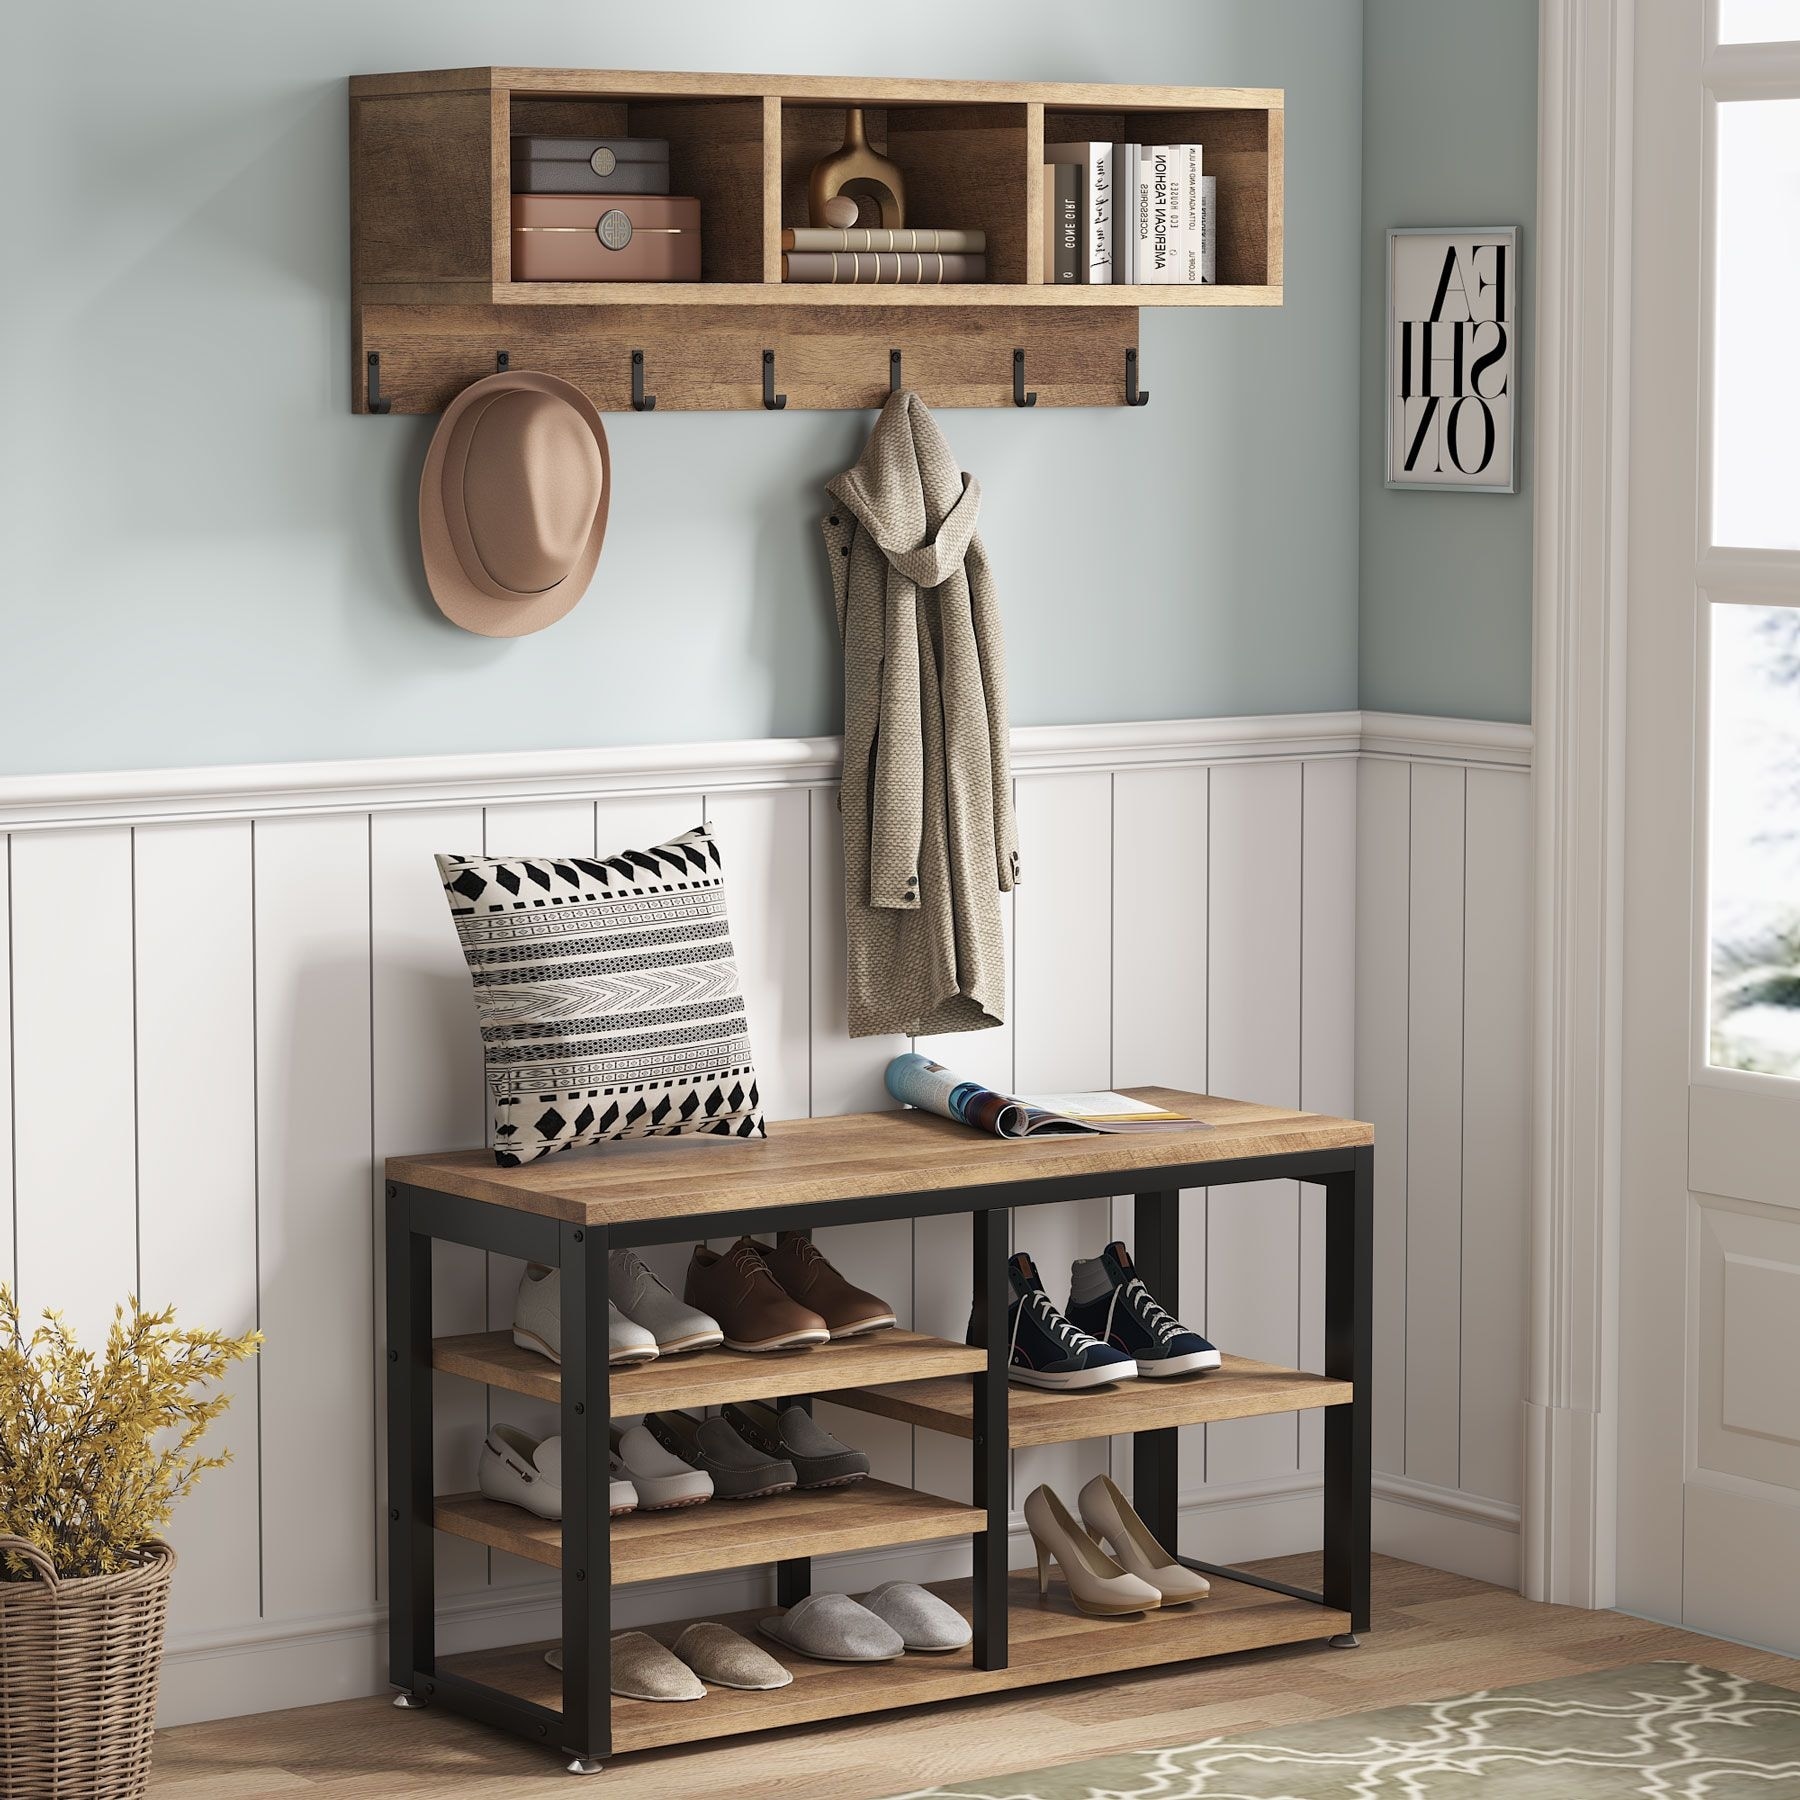 https://ak1.ostkcdn.com/images/products/is/images/direct/980b4edb488731069a8f2a946cb93b46ae16bf46/Hall-Tree-with-Bench-and-Shoe-Storage.jpg